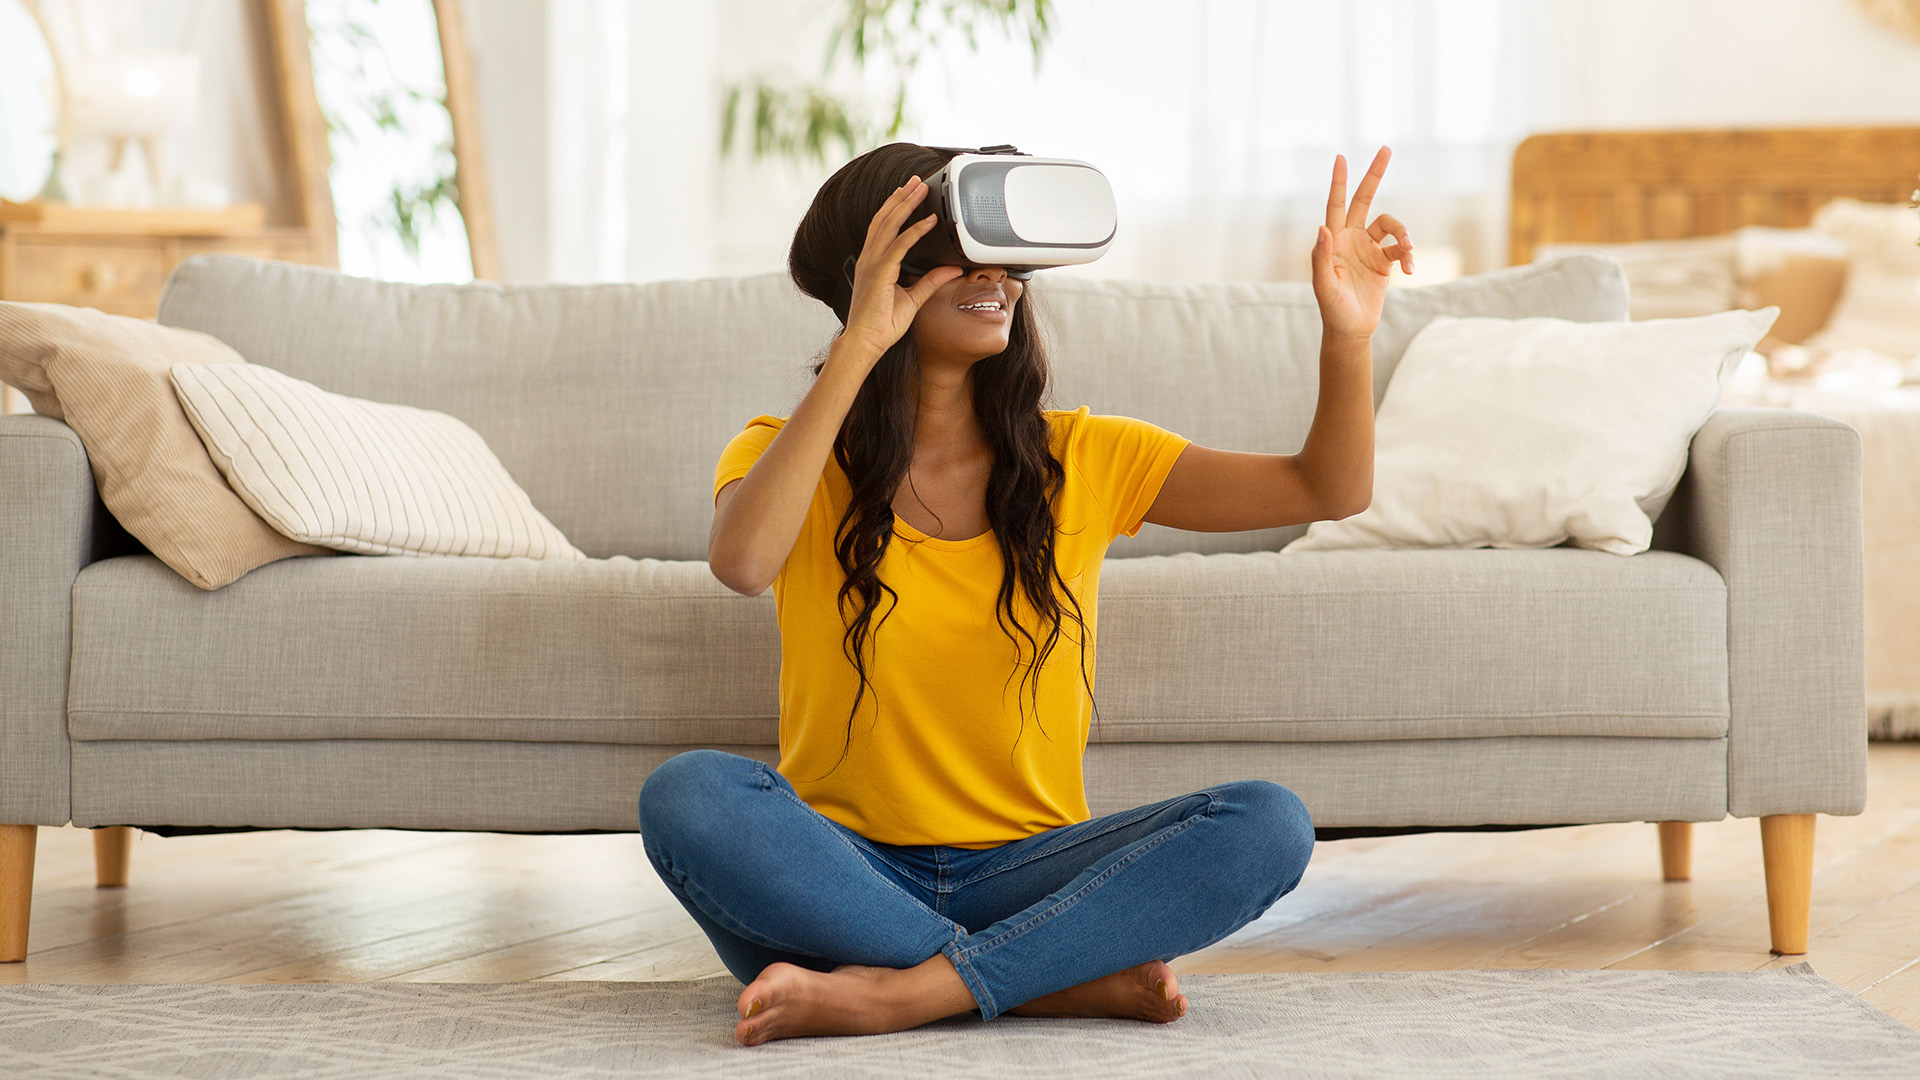 Young black woman in VR headset touching air during virtual reality experience at home during COVID lockdowns